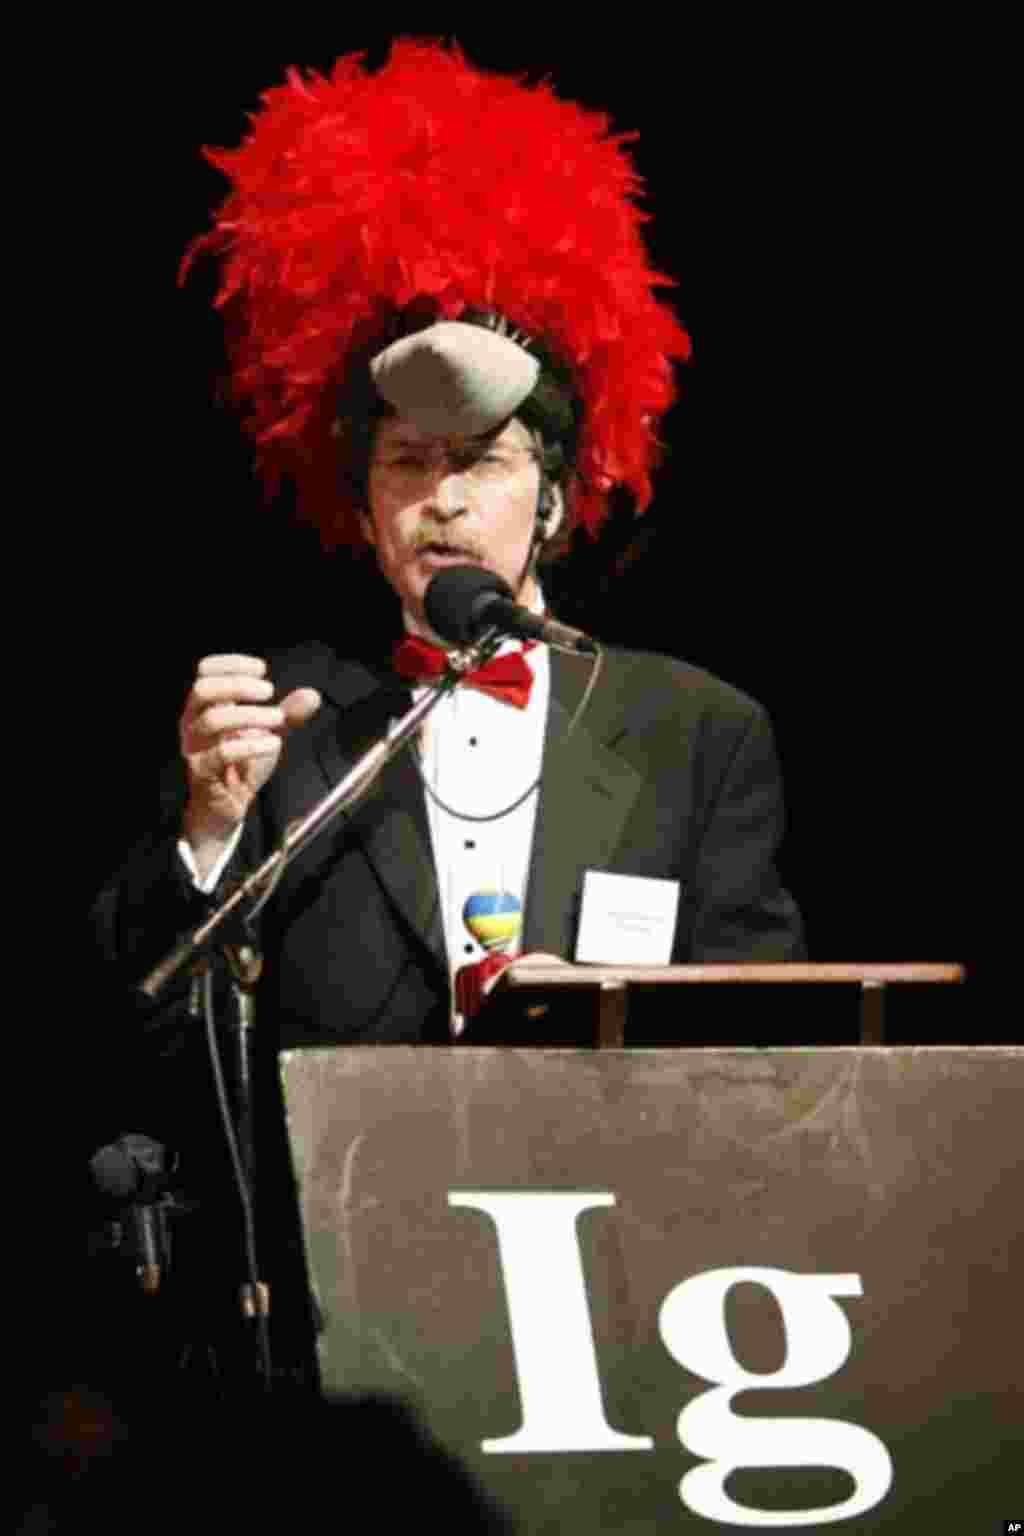 Ivan Schwab accepts the 2006 Ig Nobel prize in Ornithology at the 2006 Ig Nobel Awards ceremony at Harvard University in Cambridge, Massachusetts, October 5, 2006, for exploring and explaining why woodpeckers do not get headaches. The Ig Nobel Prizes are 